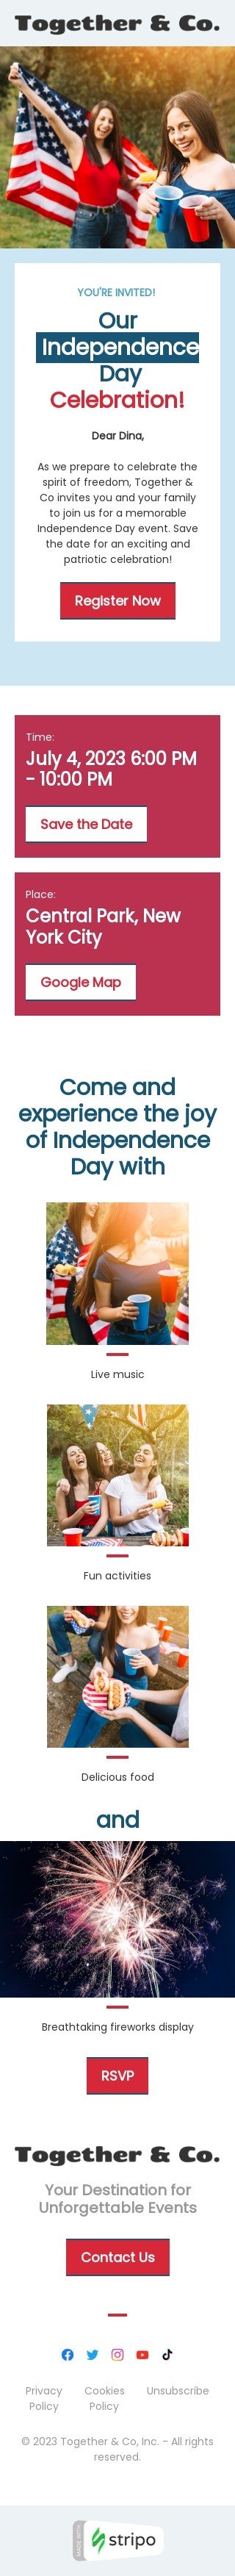 Independence Day email template "Celebrate the spirit of freedom" for hobbies industry mobile view